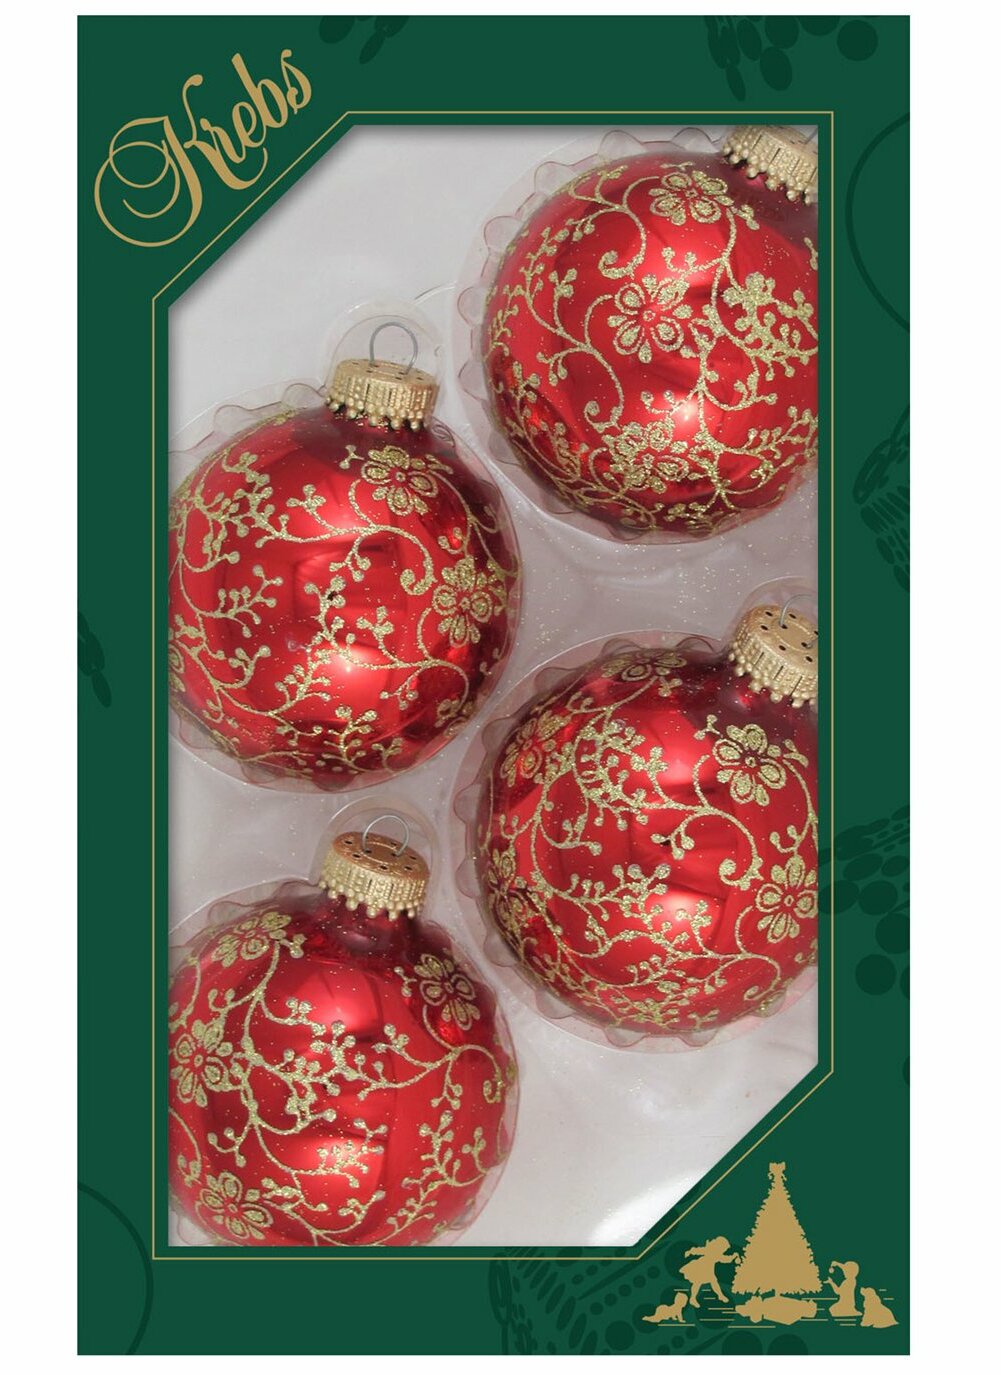 Box of 4 Large 3-1//4 Krebs Glass Ball Christmas Ornaments Frosted